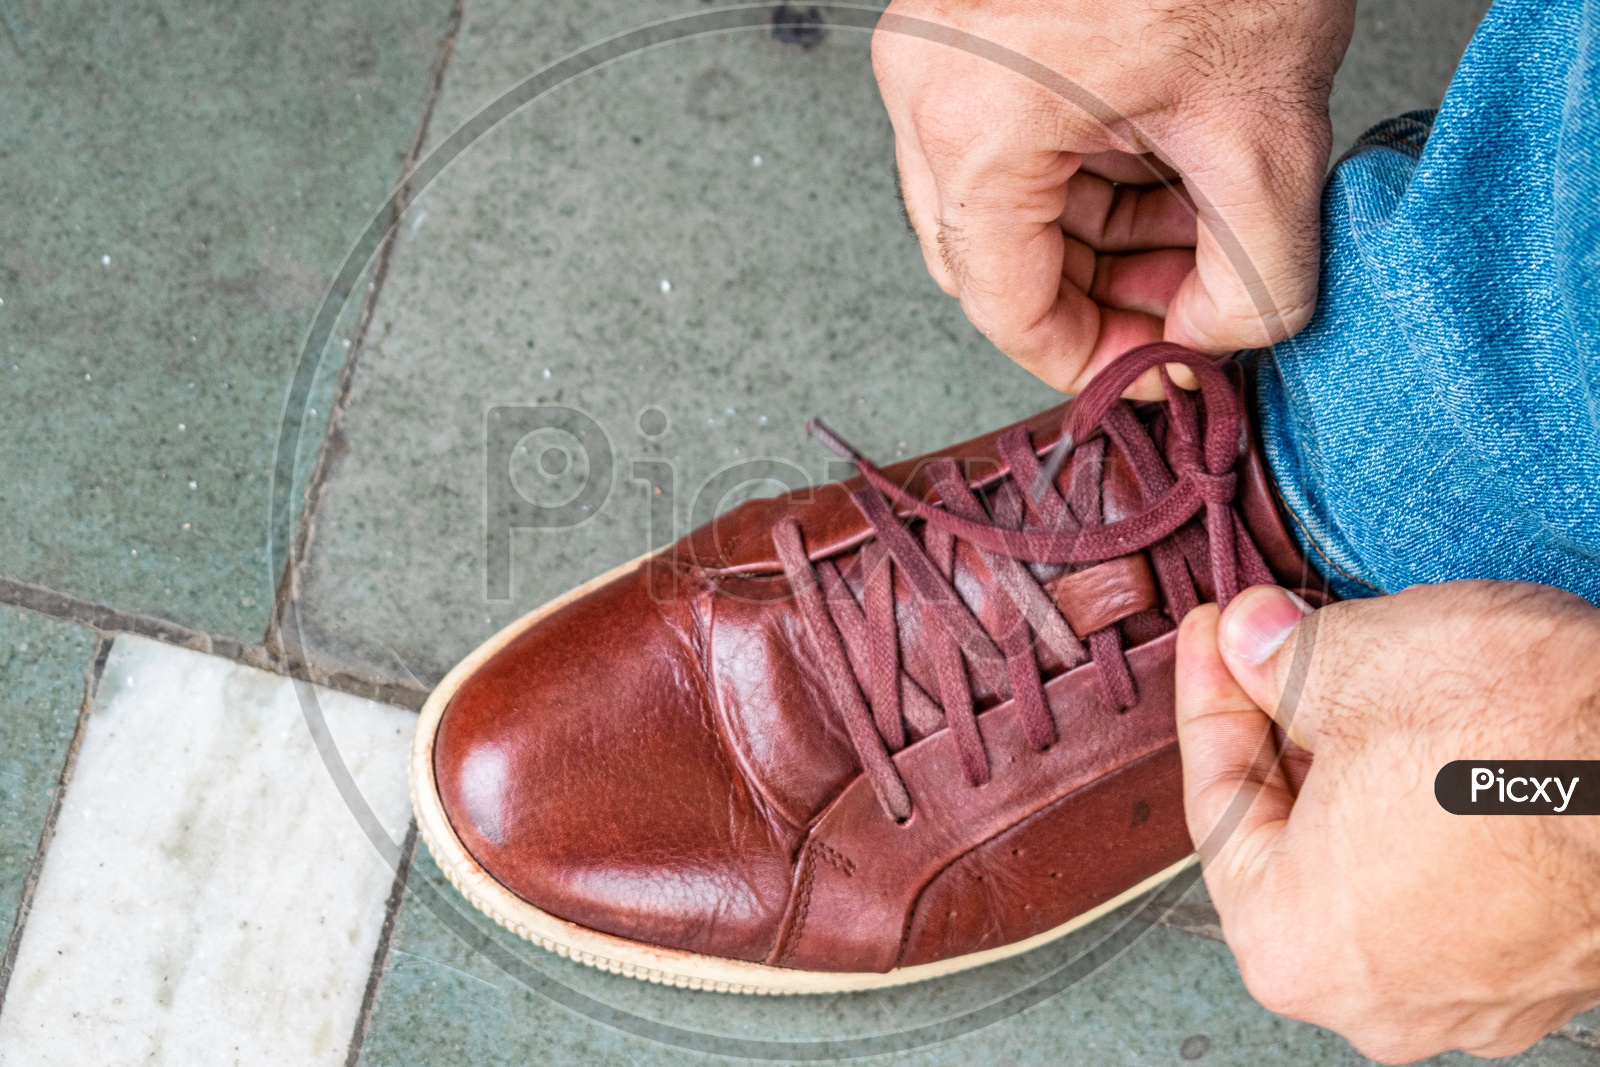 Tying shoelaces after getting it polished